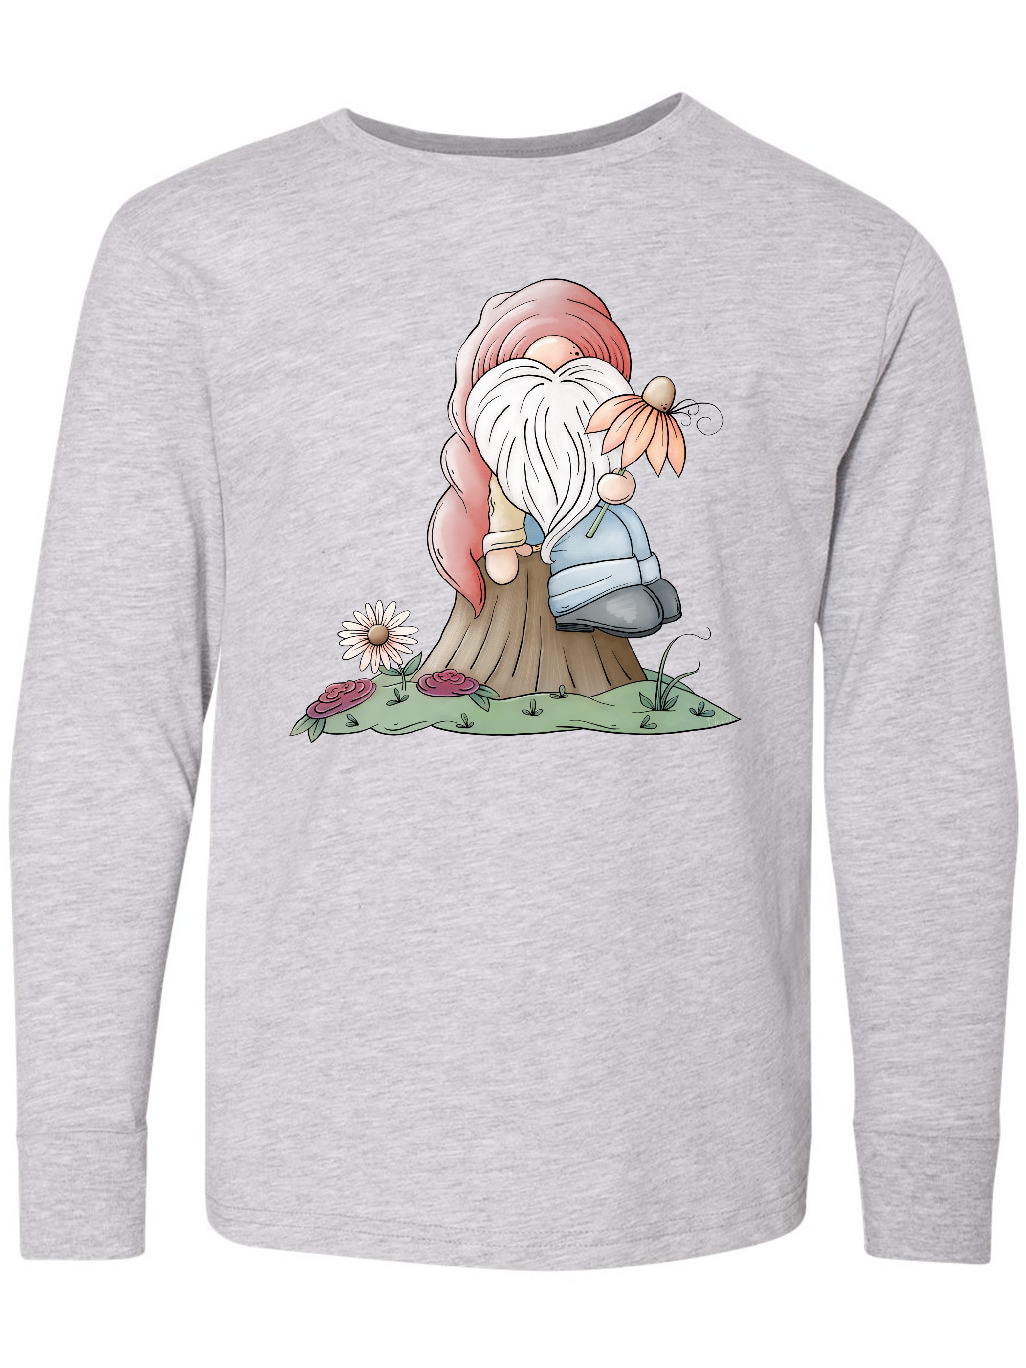 Inktastic Spring Gnome 2021 Long Sleeve Youth T-Shirt - image 1 of 4